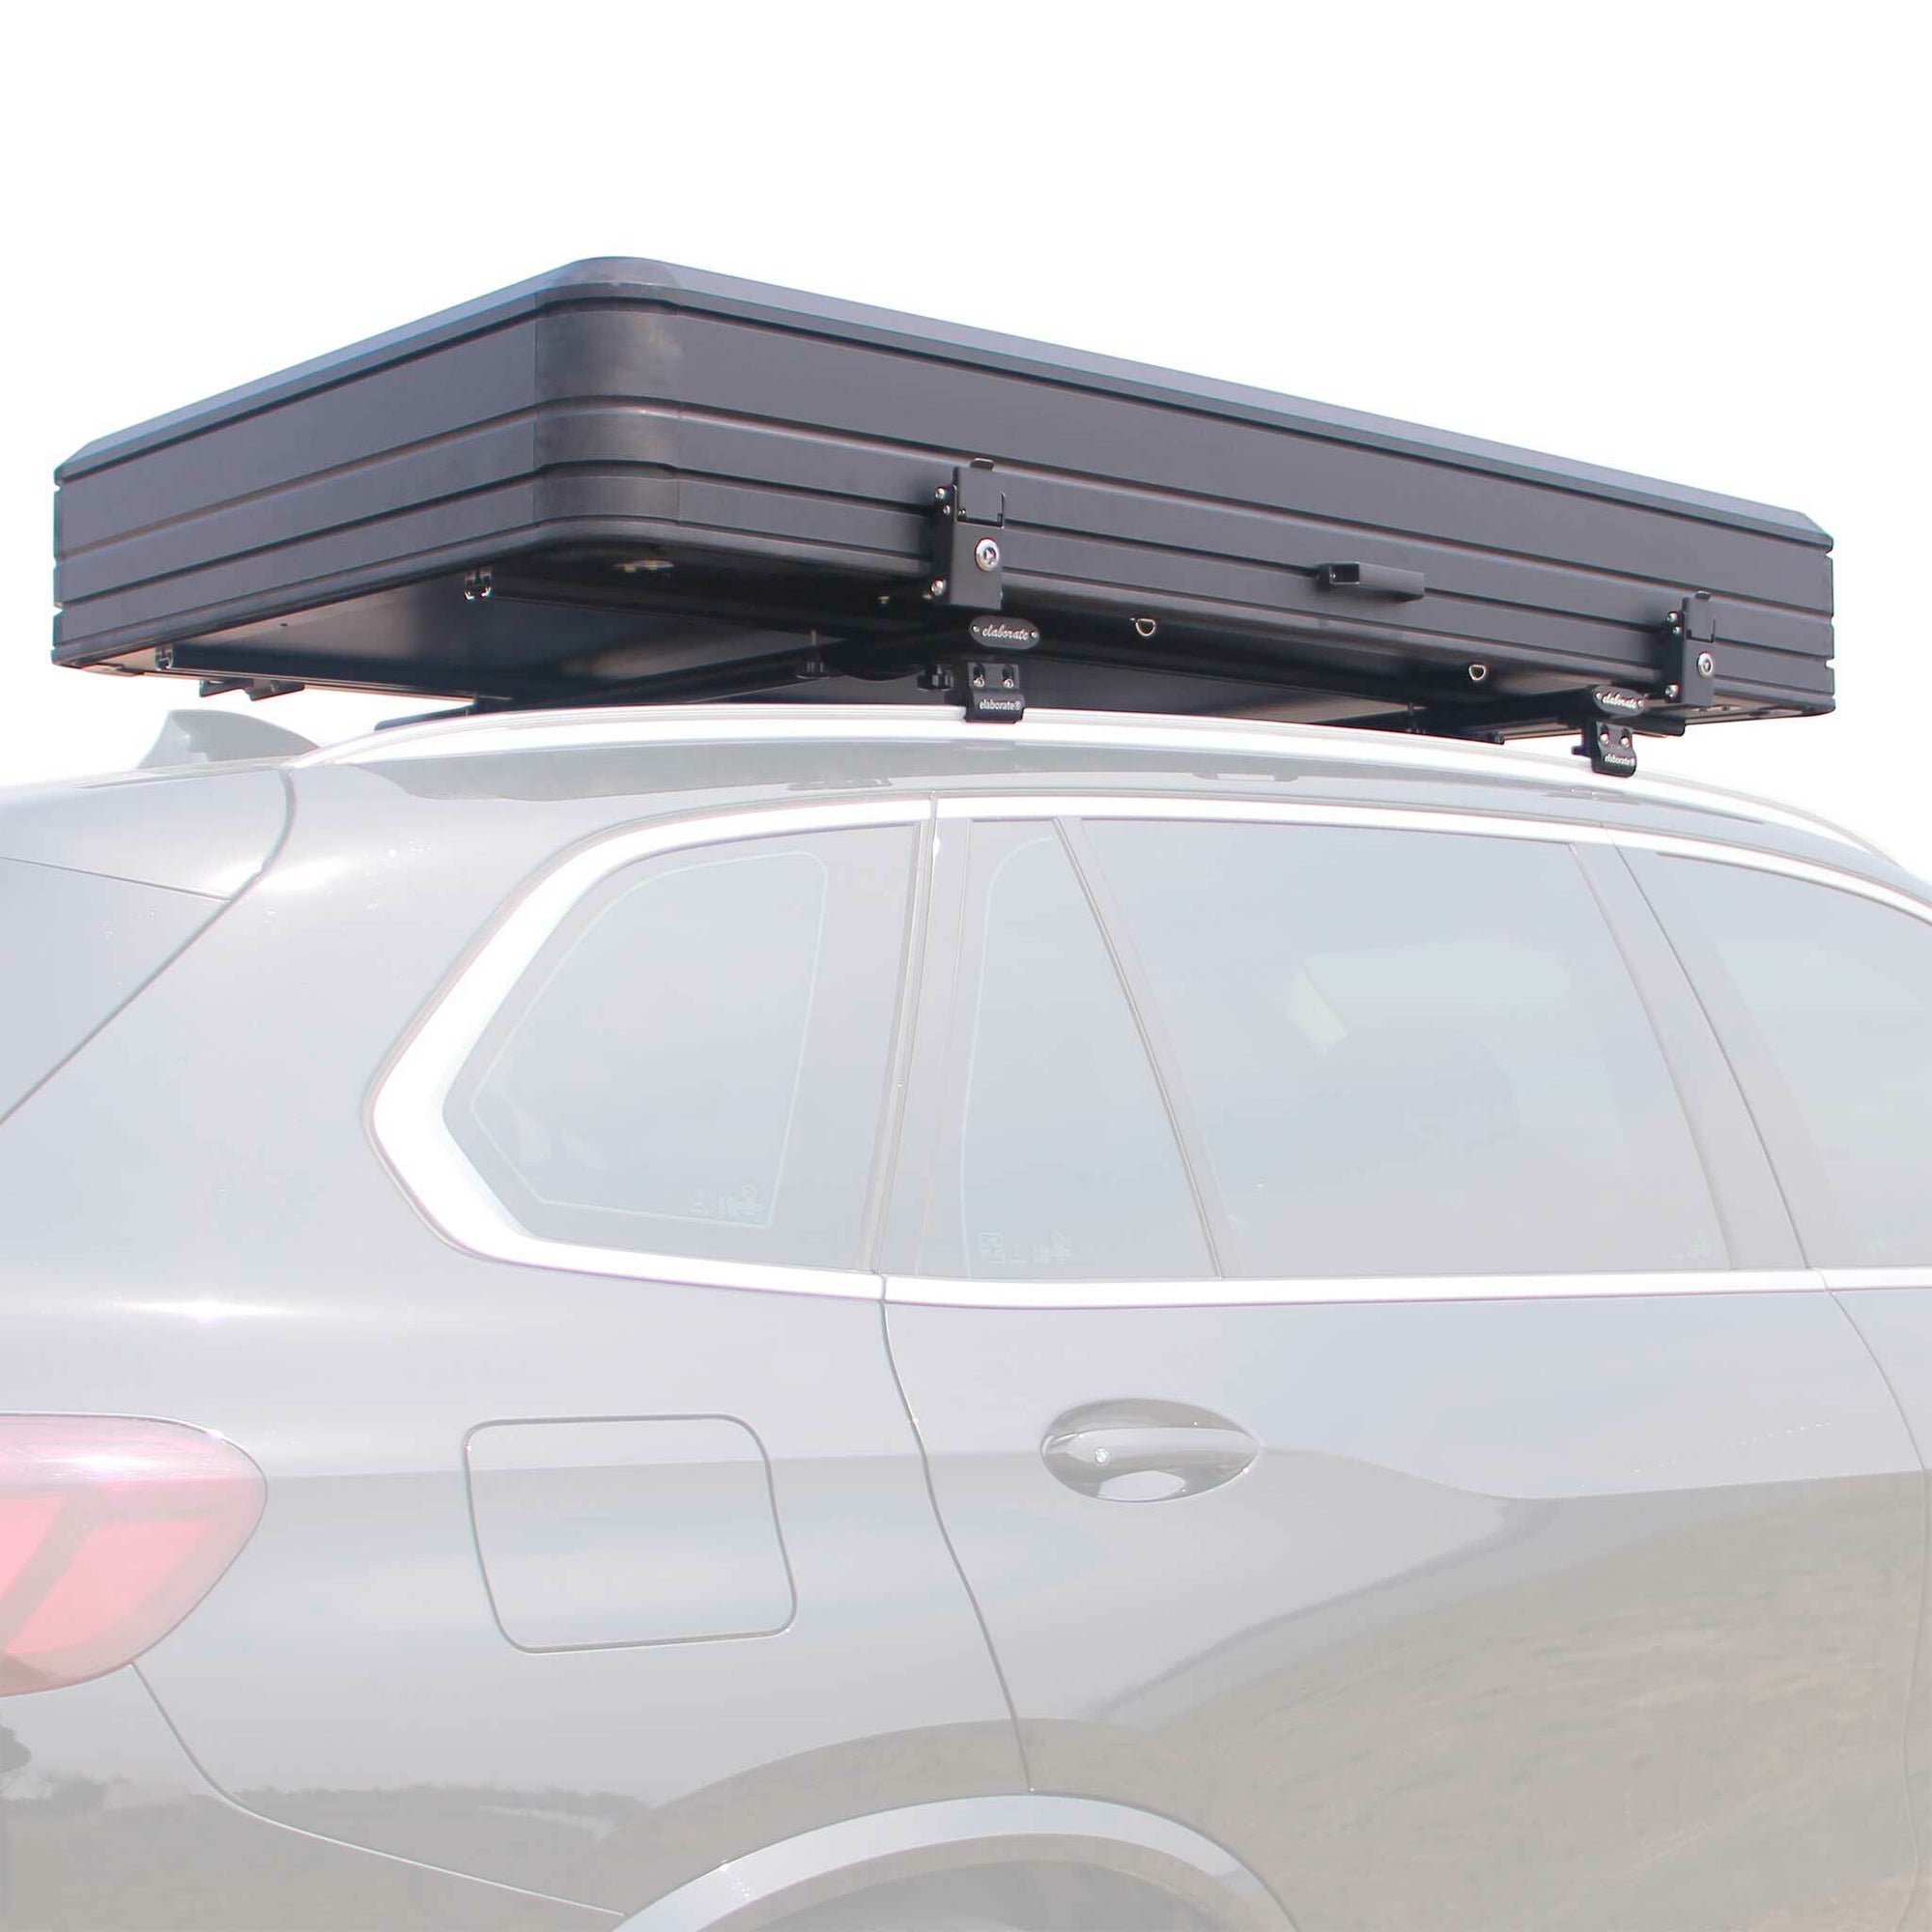 Nordcore Rooftop tent Summit Pro XL, Gray